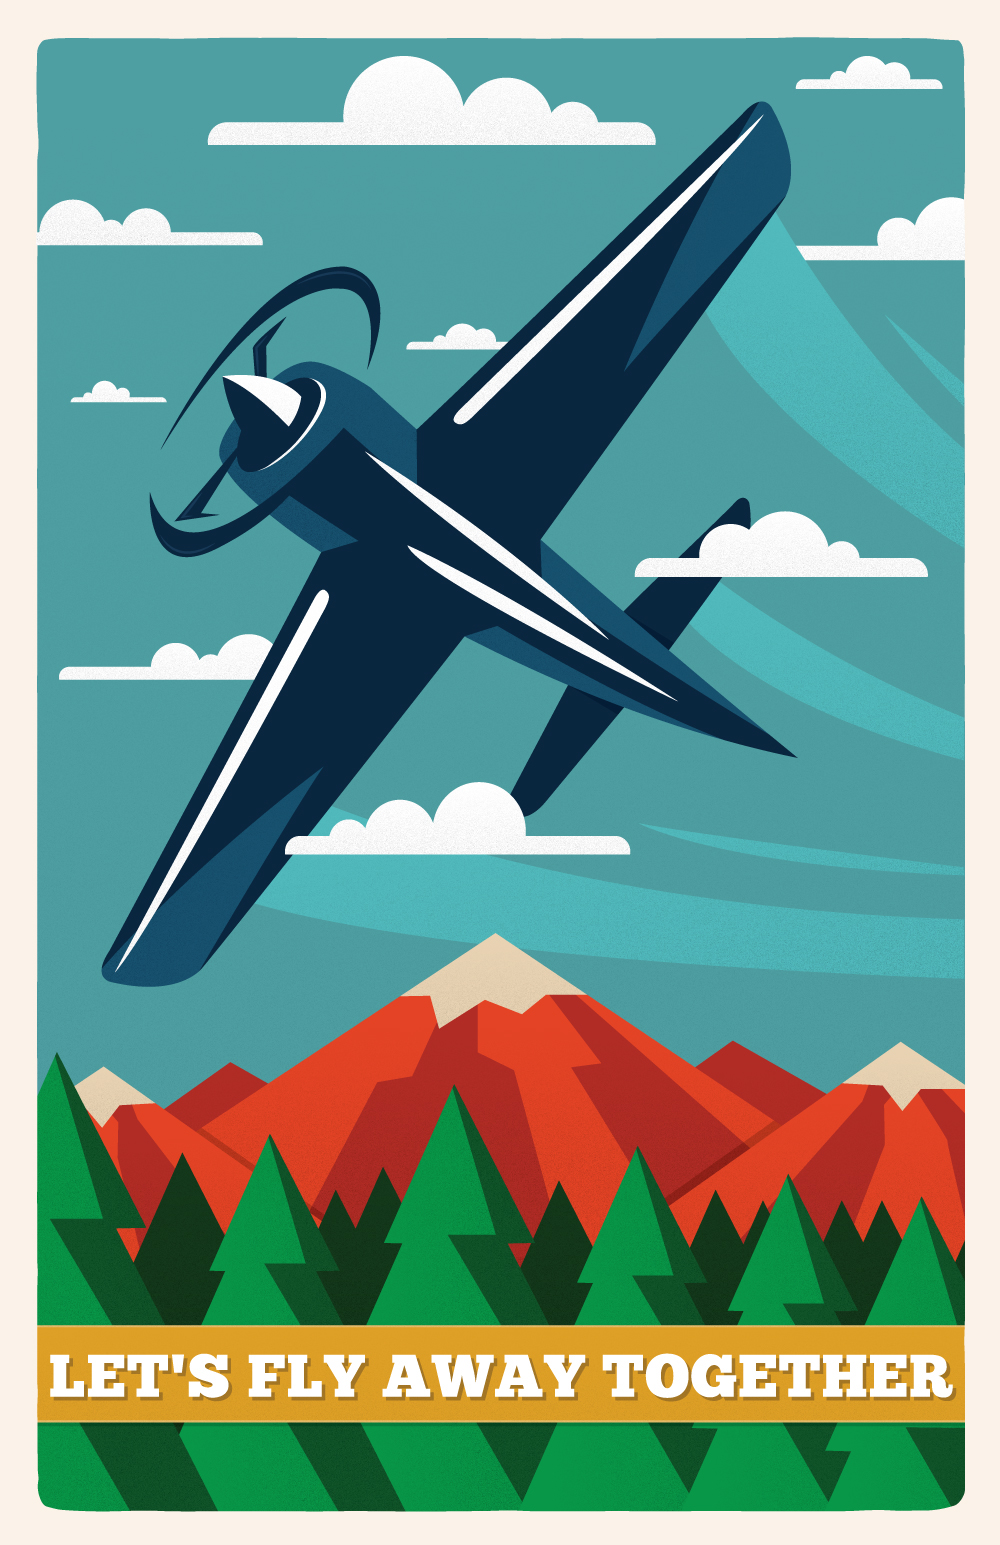 plane SKY Fly clouds poster design